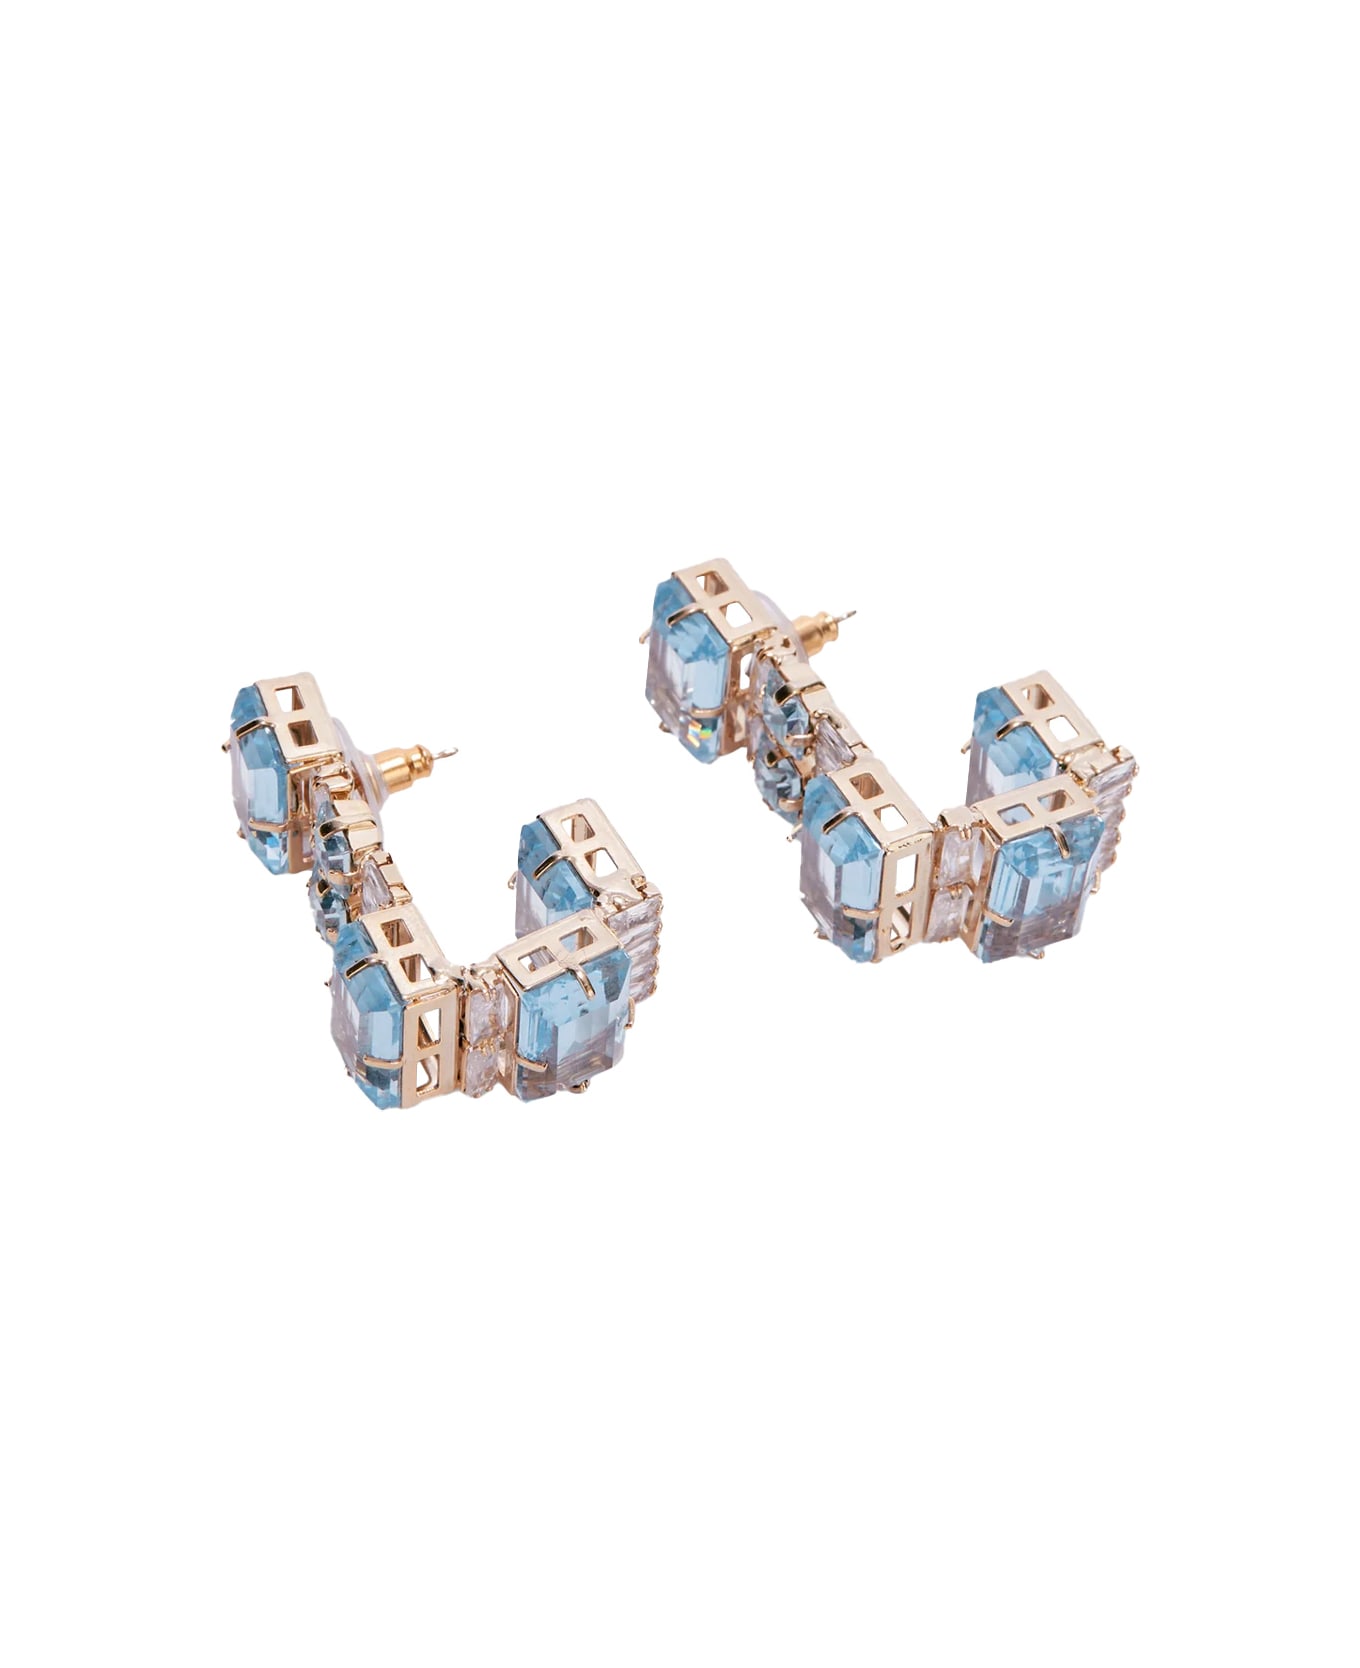 Ermanno Scervino Earrings With Light Blue Stones - Blue イヤリング